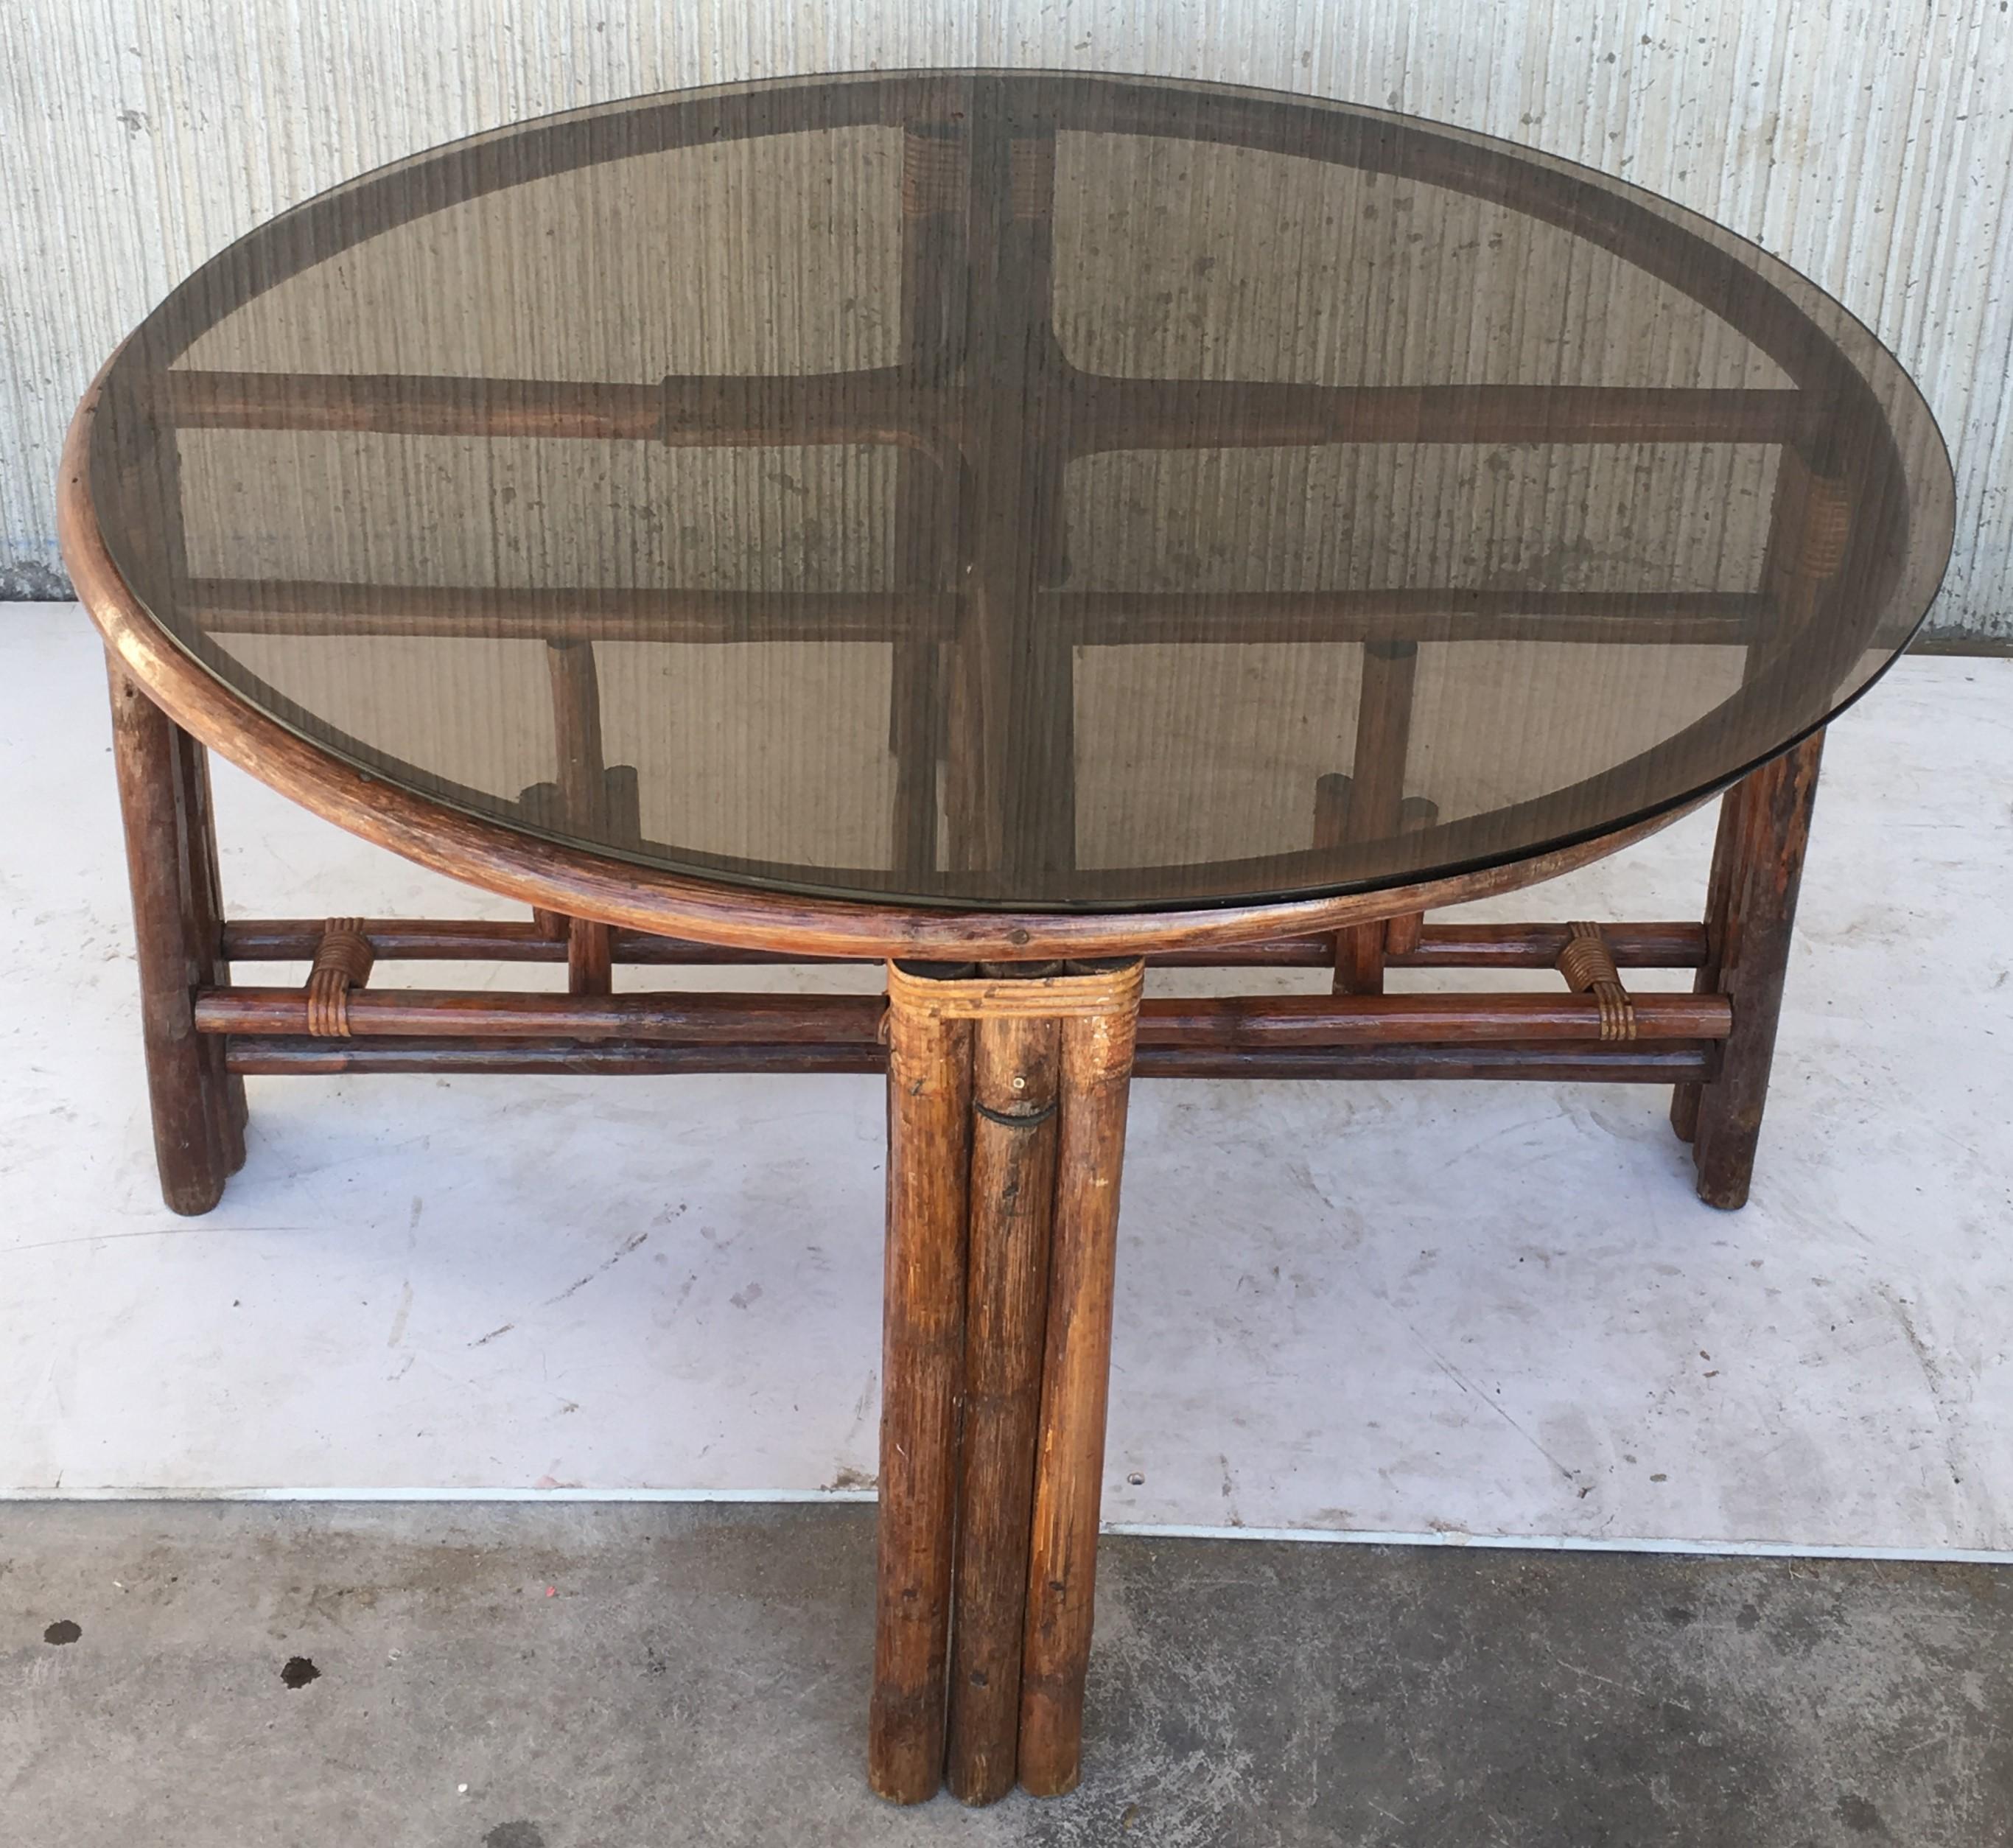 20th Century Vintage Round McGuire Style Bamboo and Glass Dining Table with Four Stools